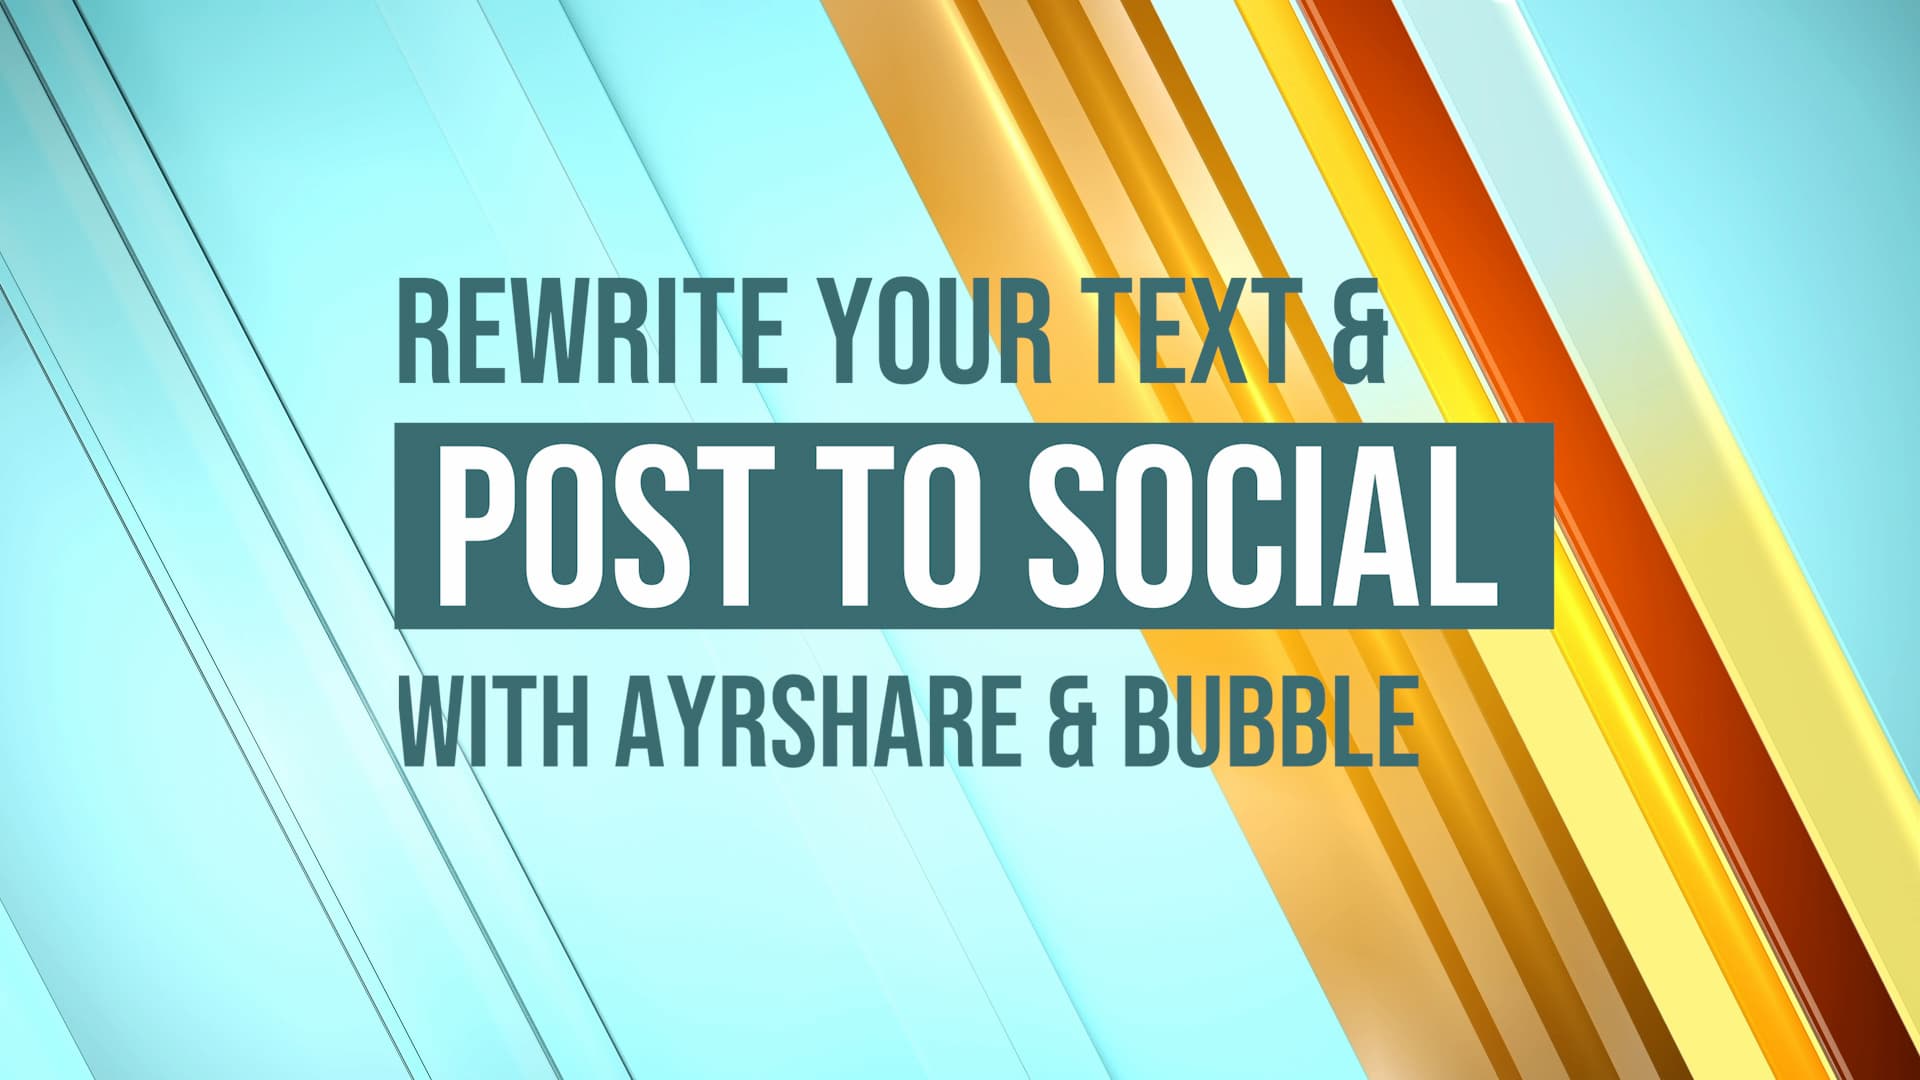 Rewrite your text & post to social with ayrshare & bubble.